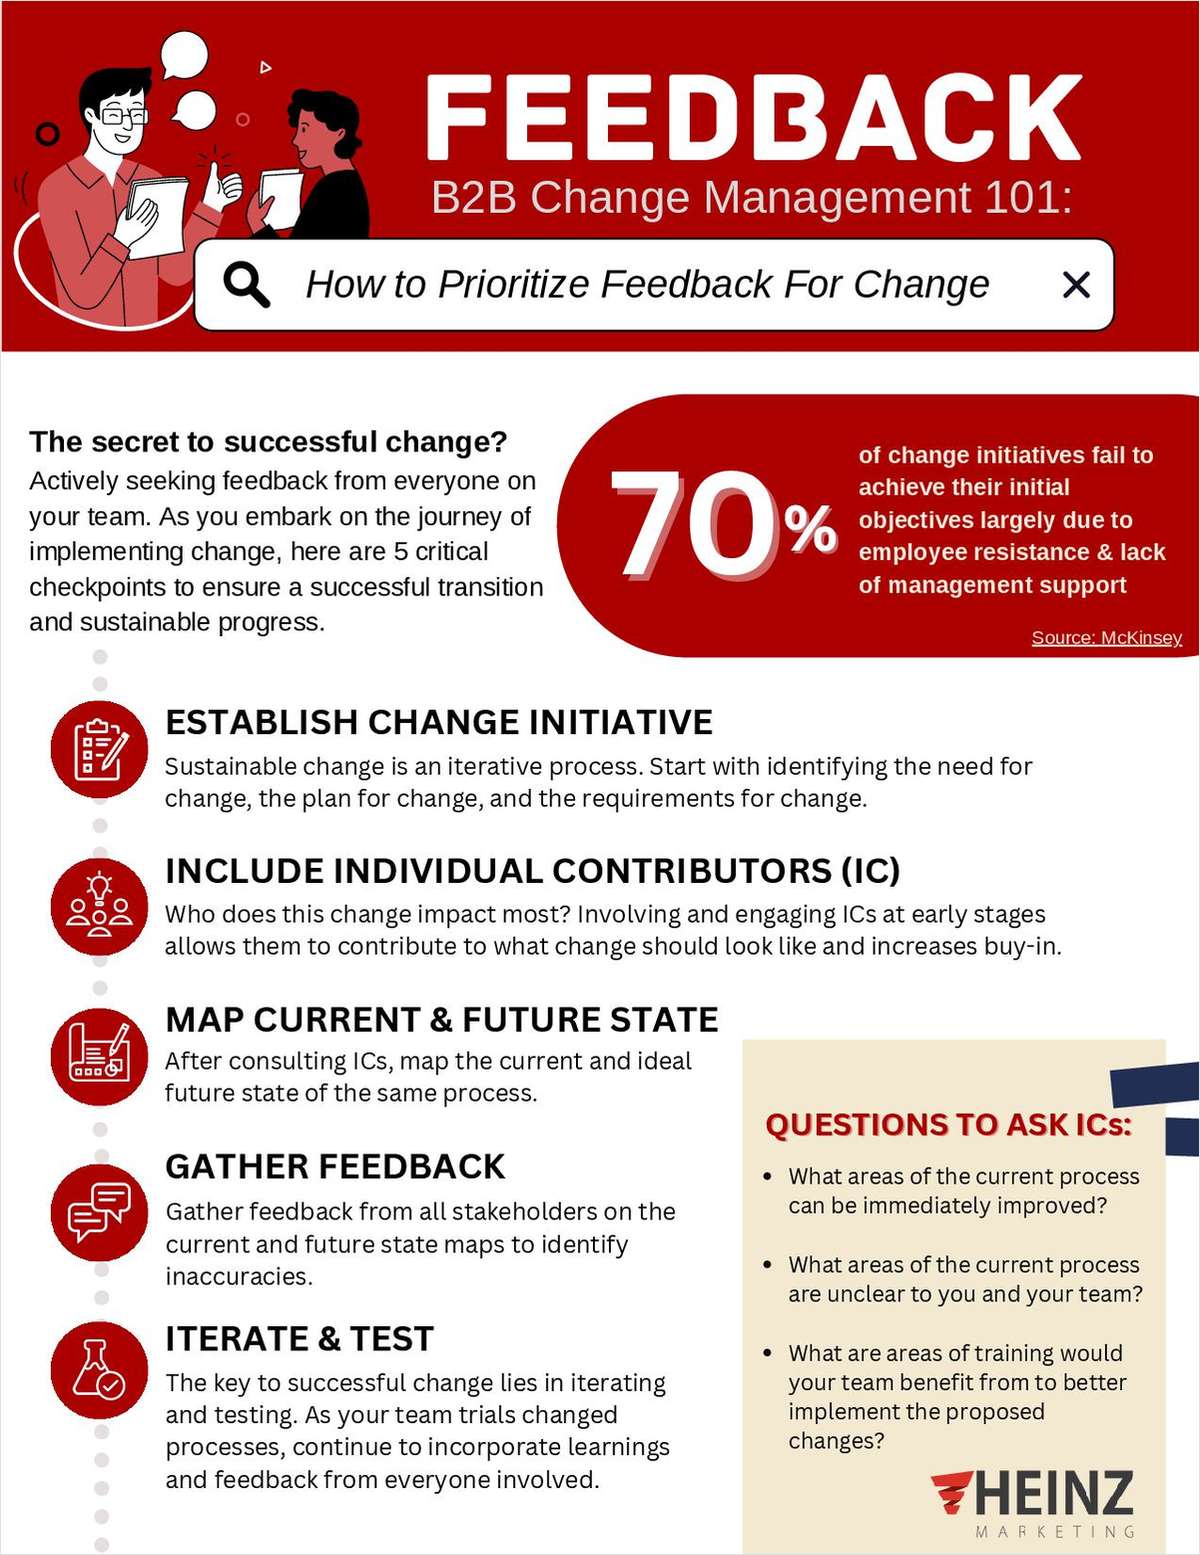 How to Prioritize Feedback for Change